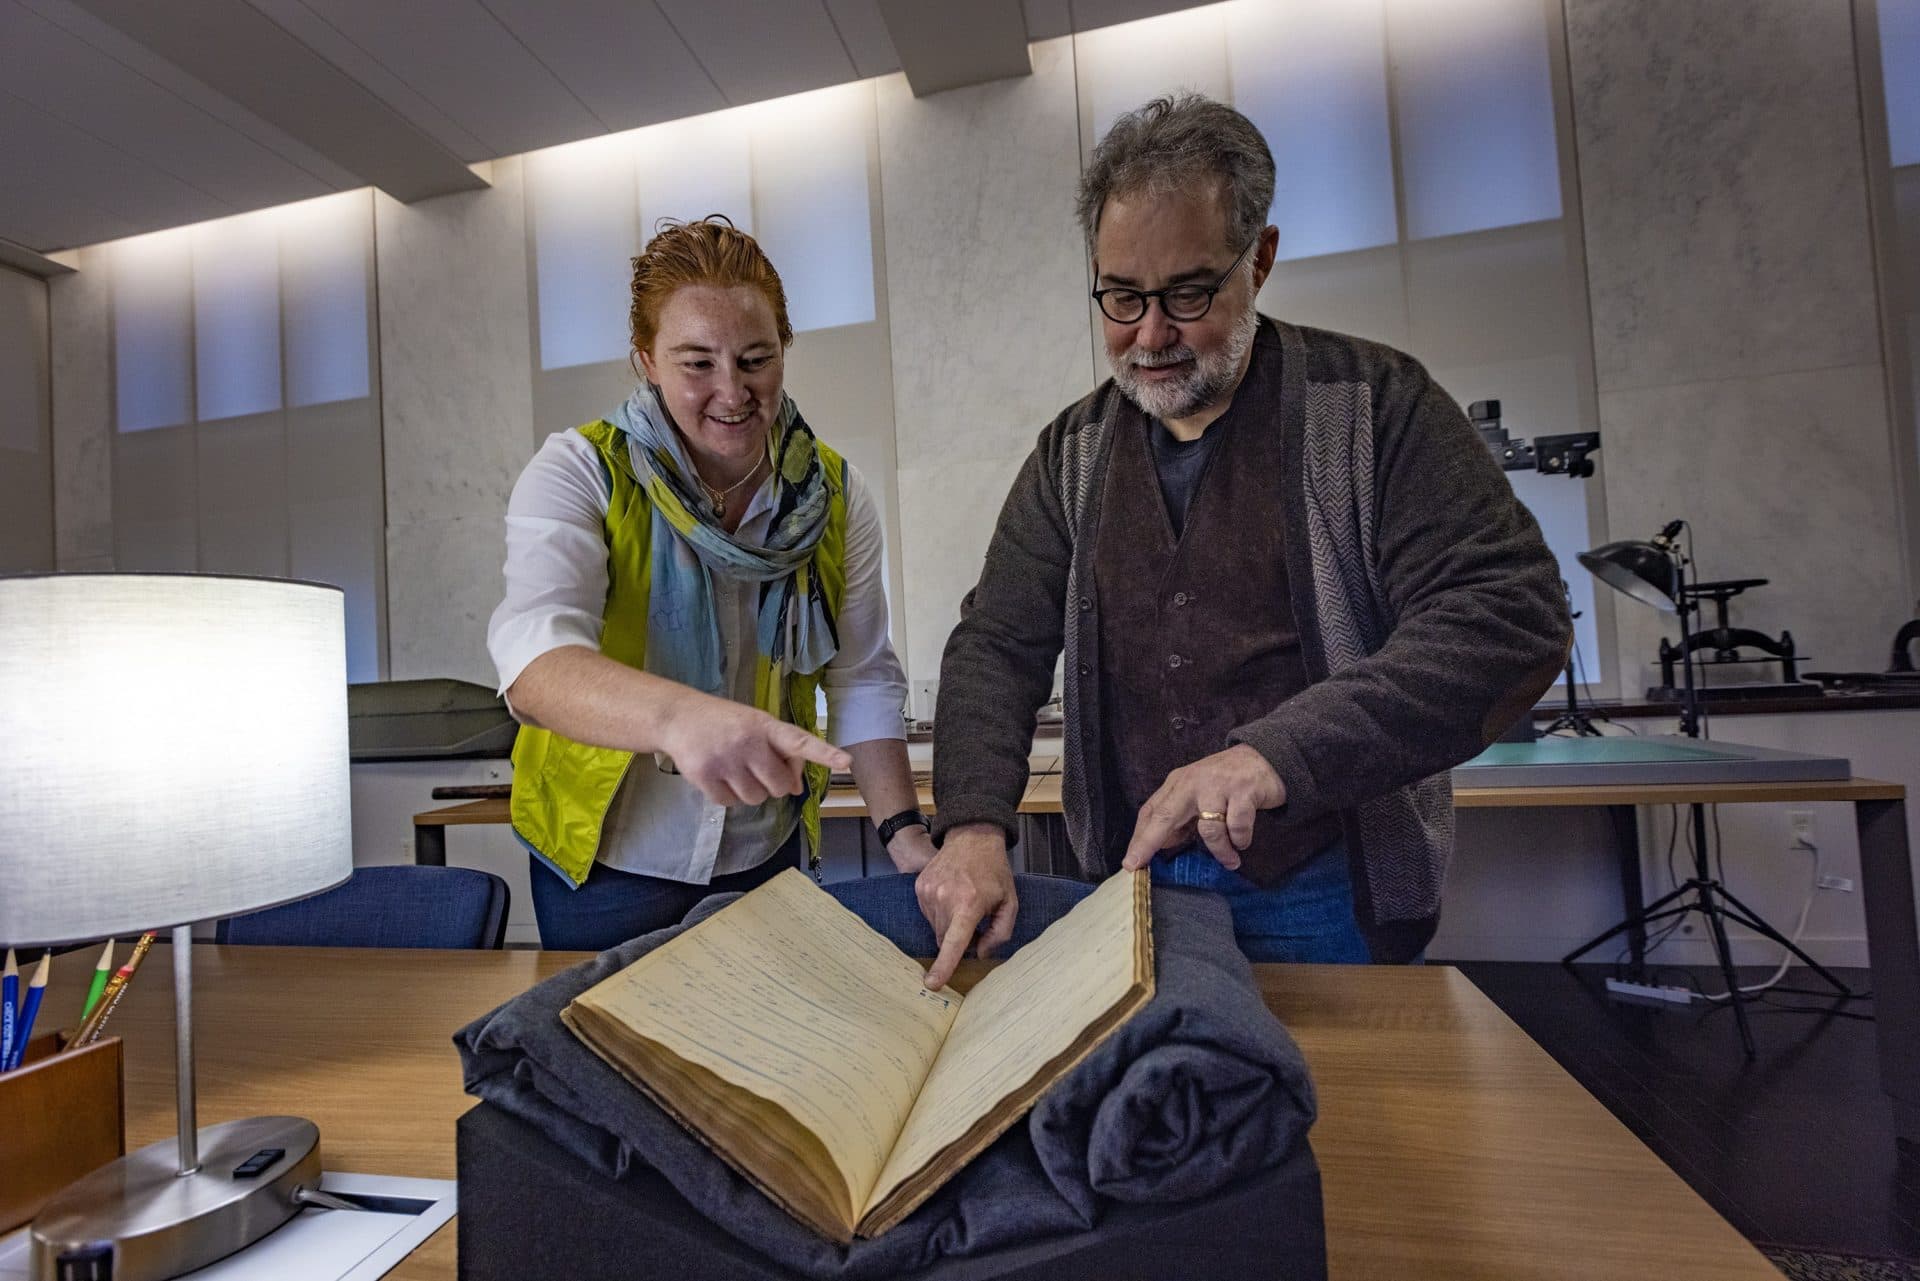 At the Providence Public Library, Caroline Ummenhofer, oceanographer at Woods Hole Oceanographic Institute, and Timothy Walker, history professor at UMass Darmouth, point out some of the weather features noted in the log book of the Ship Lion, during its voyage to the South Pacific between 1841-1844. (Jesse Costa/WBUR)